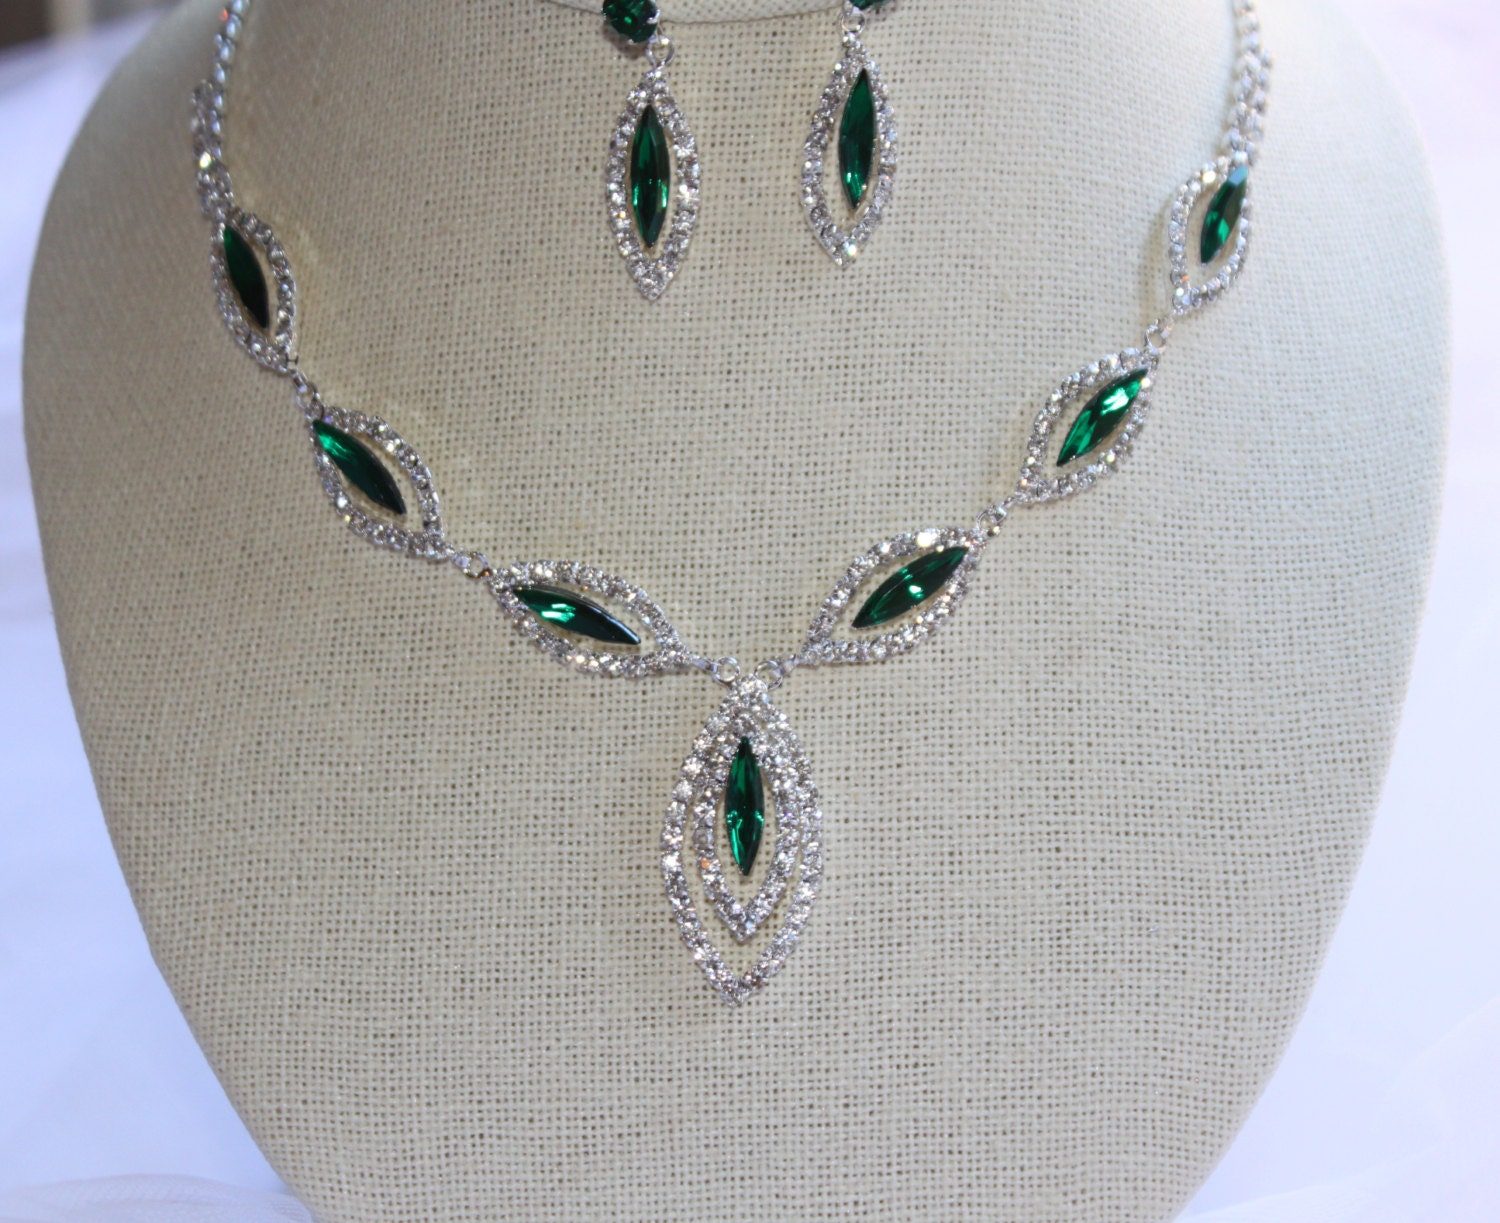 Bridal Jewelry Set Vintage Inspired Silver Emerald - Etsy